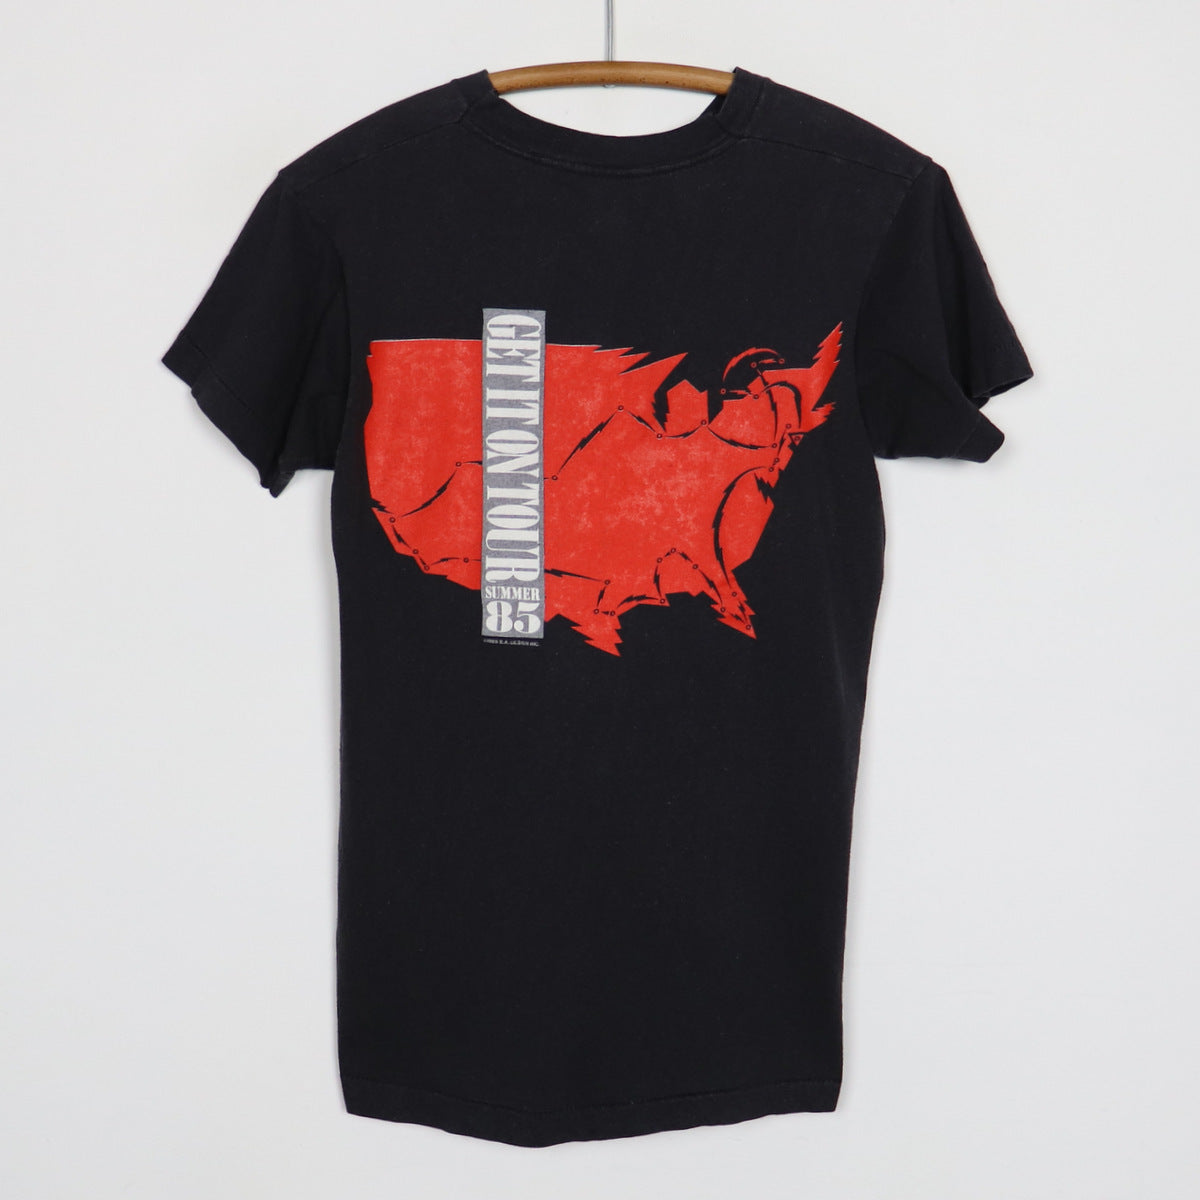 1985 The Power Station Get It On Tour Shirt